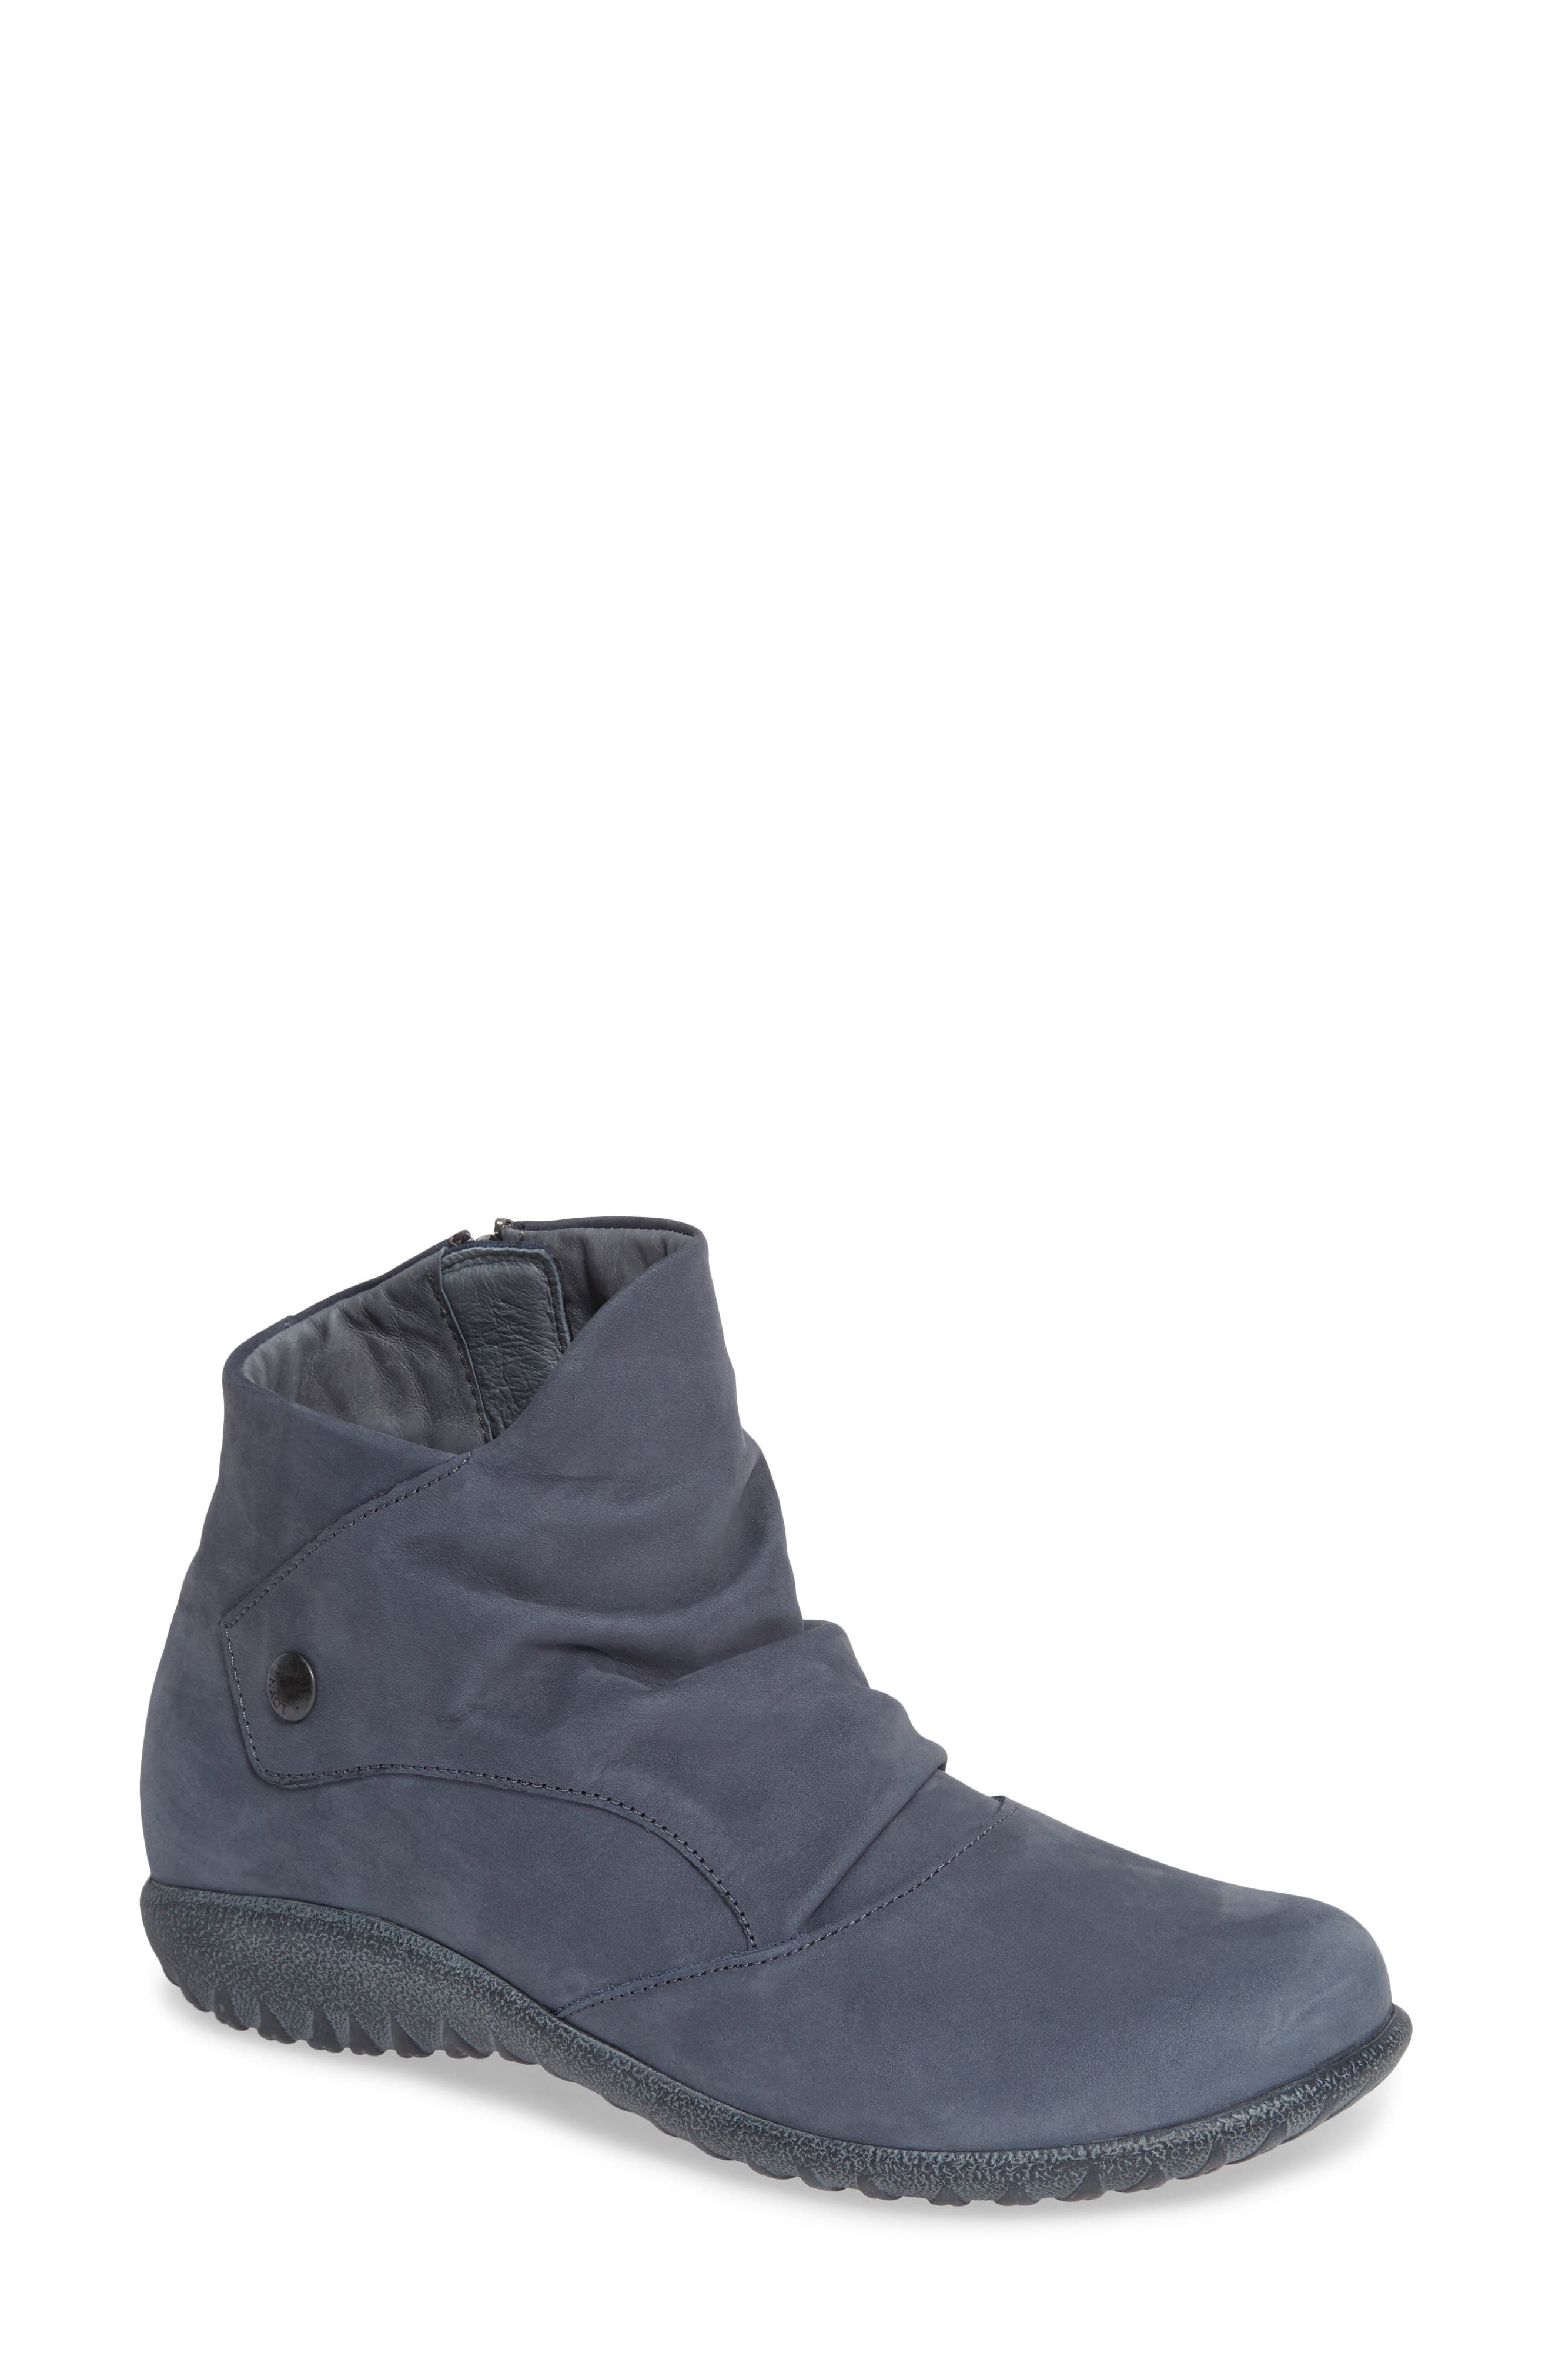 naot boots clearance